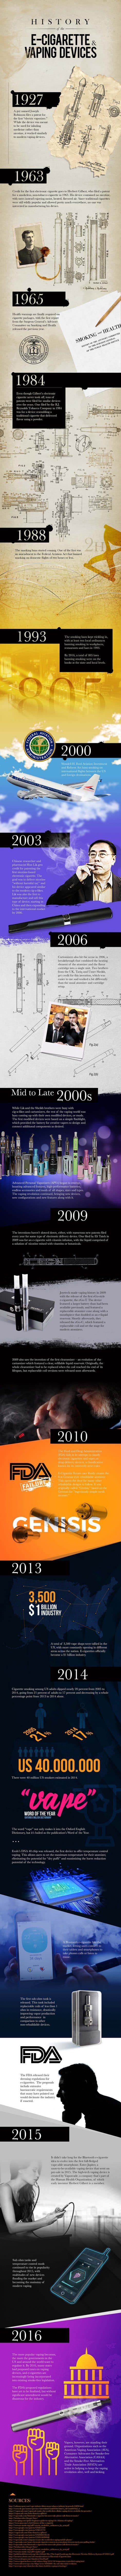 History of Vaping and the E-Cigarette Infographic